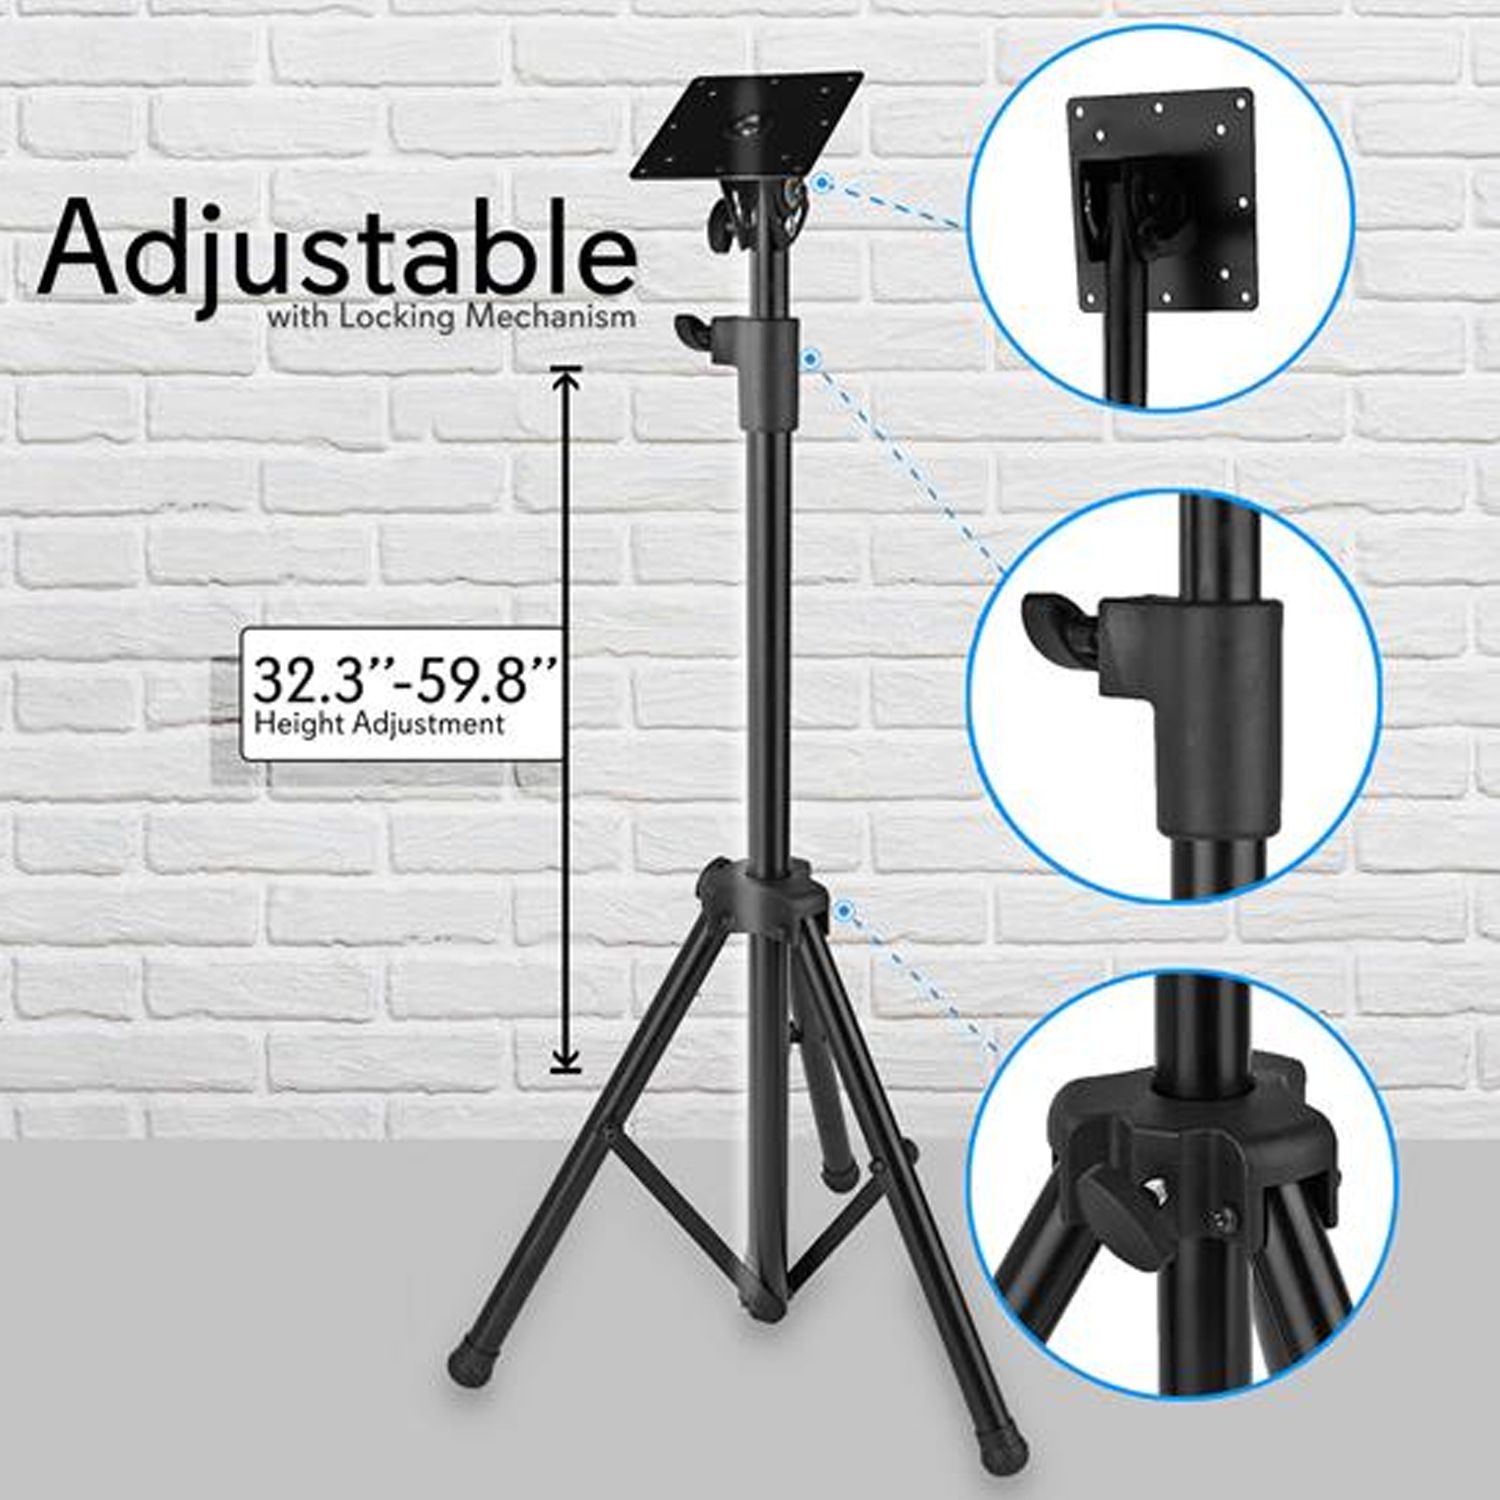 Pyle Foldable Portable Adjustable Height Steel Tripod Flatscreen Tv Within Foldable Portable Adjustable Tv Stands (Gallery 3 of 20)